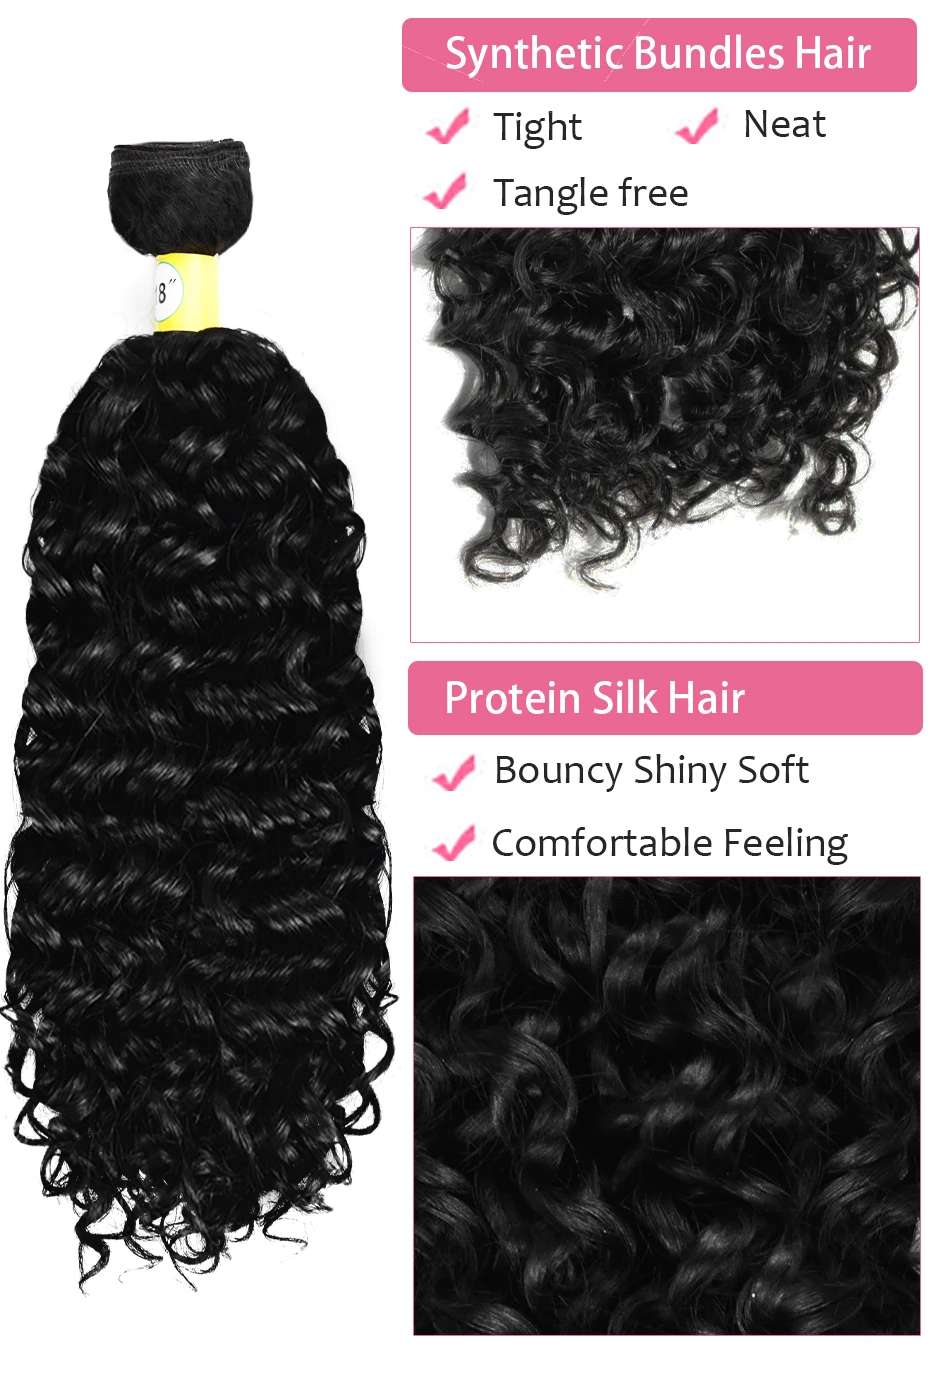 12-30 Inch Kinky Curly Hair Bundles With T Lace Closure 1B# Synthetic Hair Bundles Weave Extensions W/ T Part Lace Closure